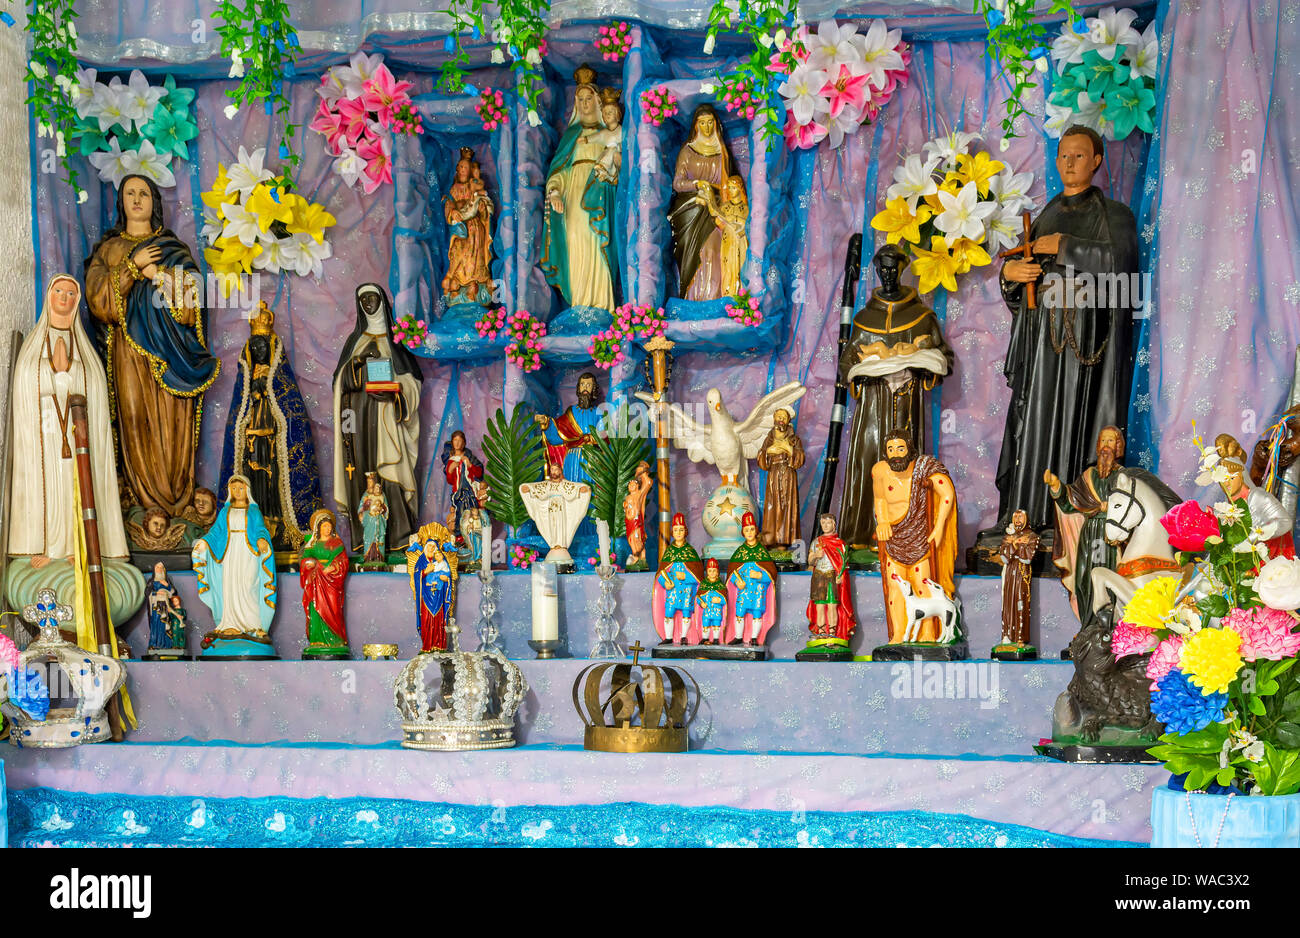 Brazilian religious altar mixing elements of umbanda, candomblé and catholicism in the syncretism present in the local culture and religion Stock Photo